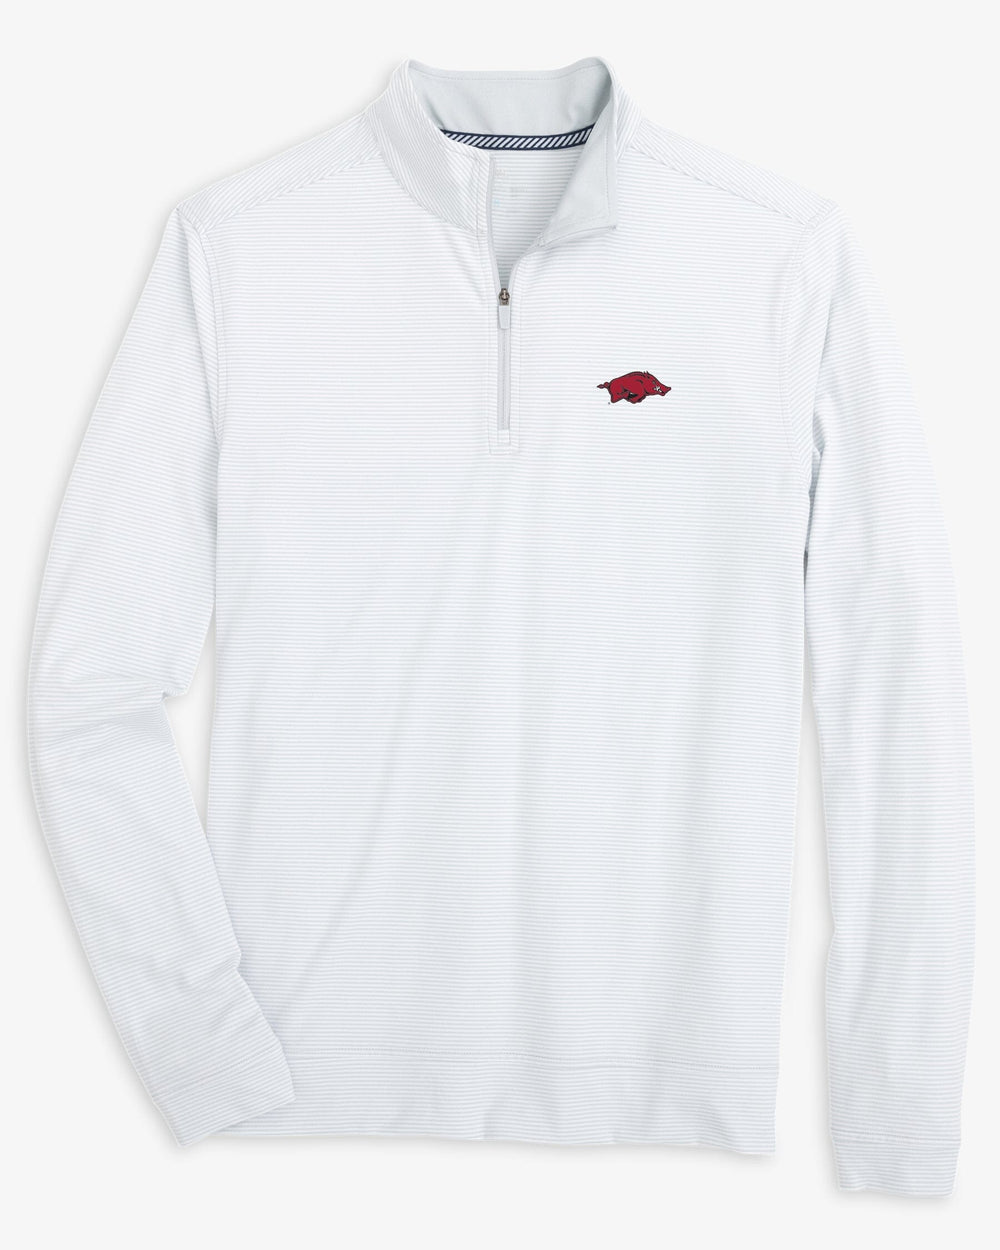 The front view of the Arkansas Razorbacks Cruiser Micro-Stripe Heather Quarter Zip by Southern Tide - Heather Slate Grey